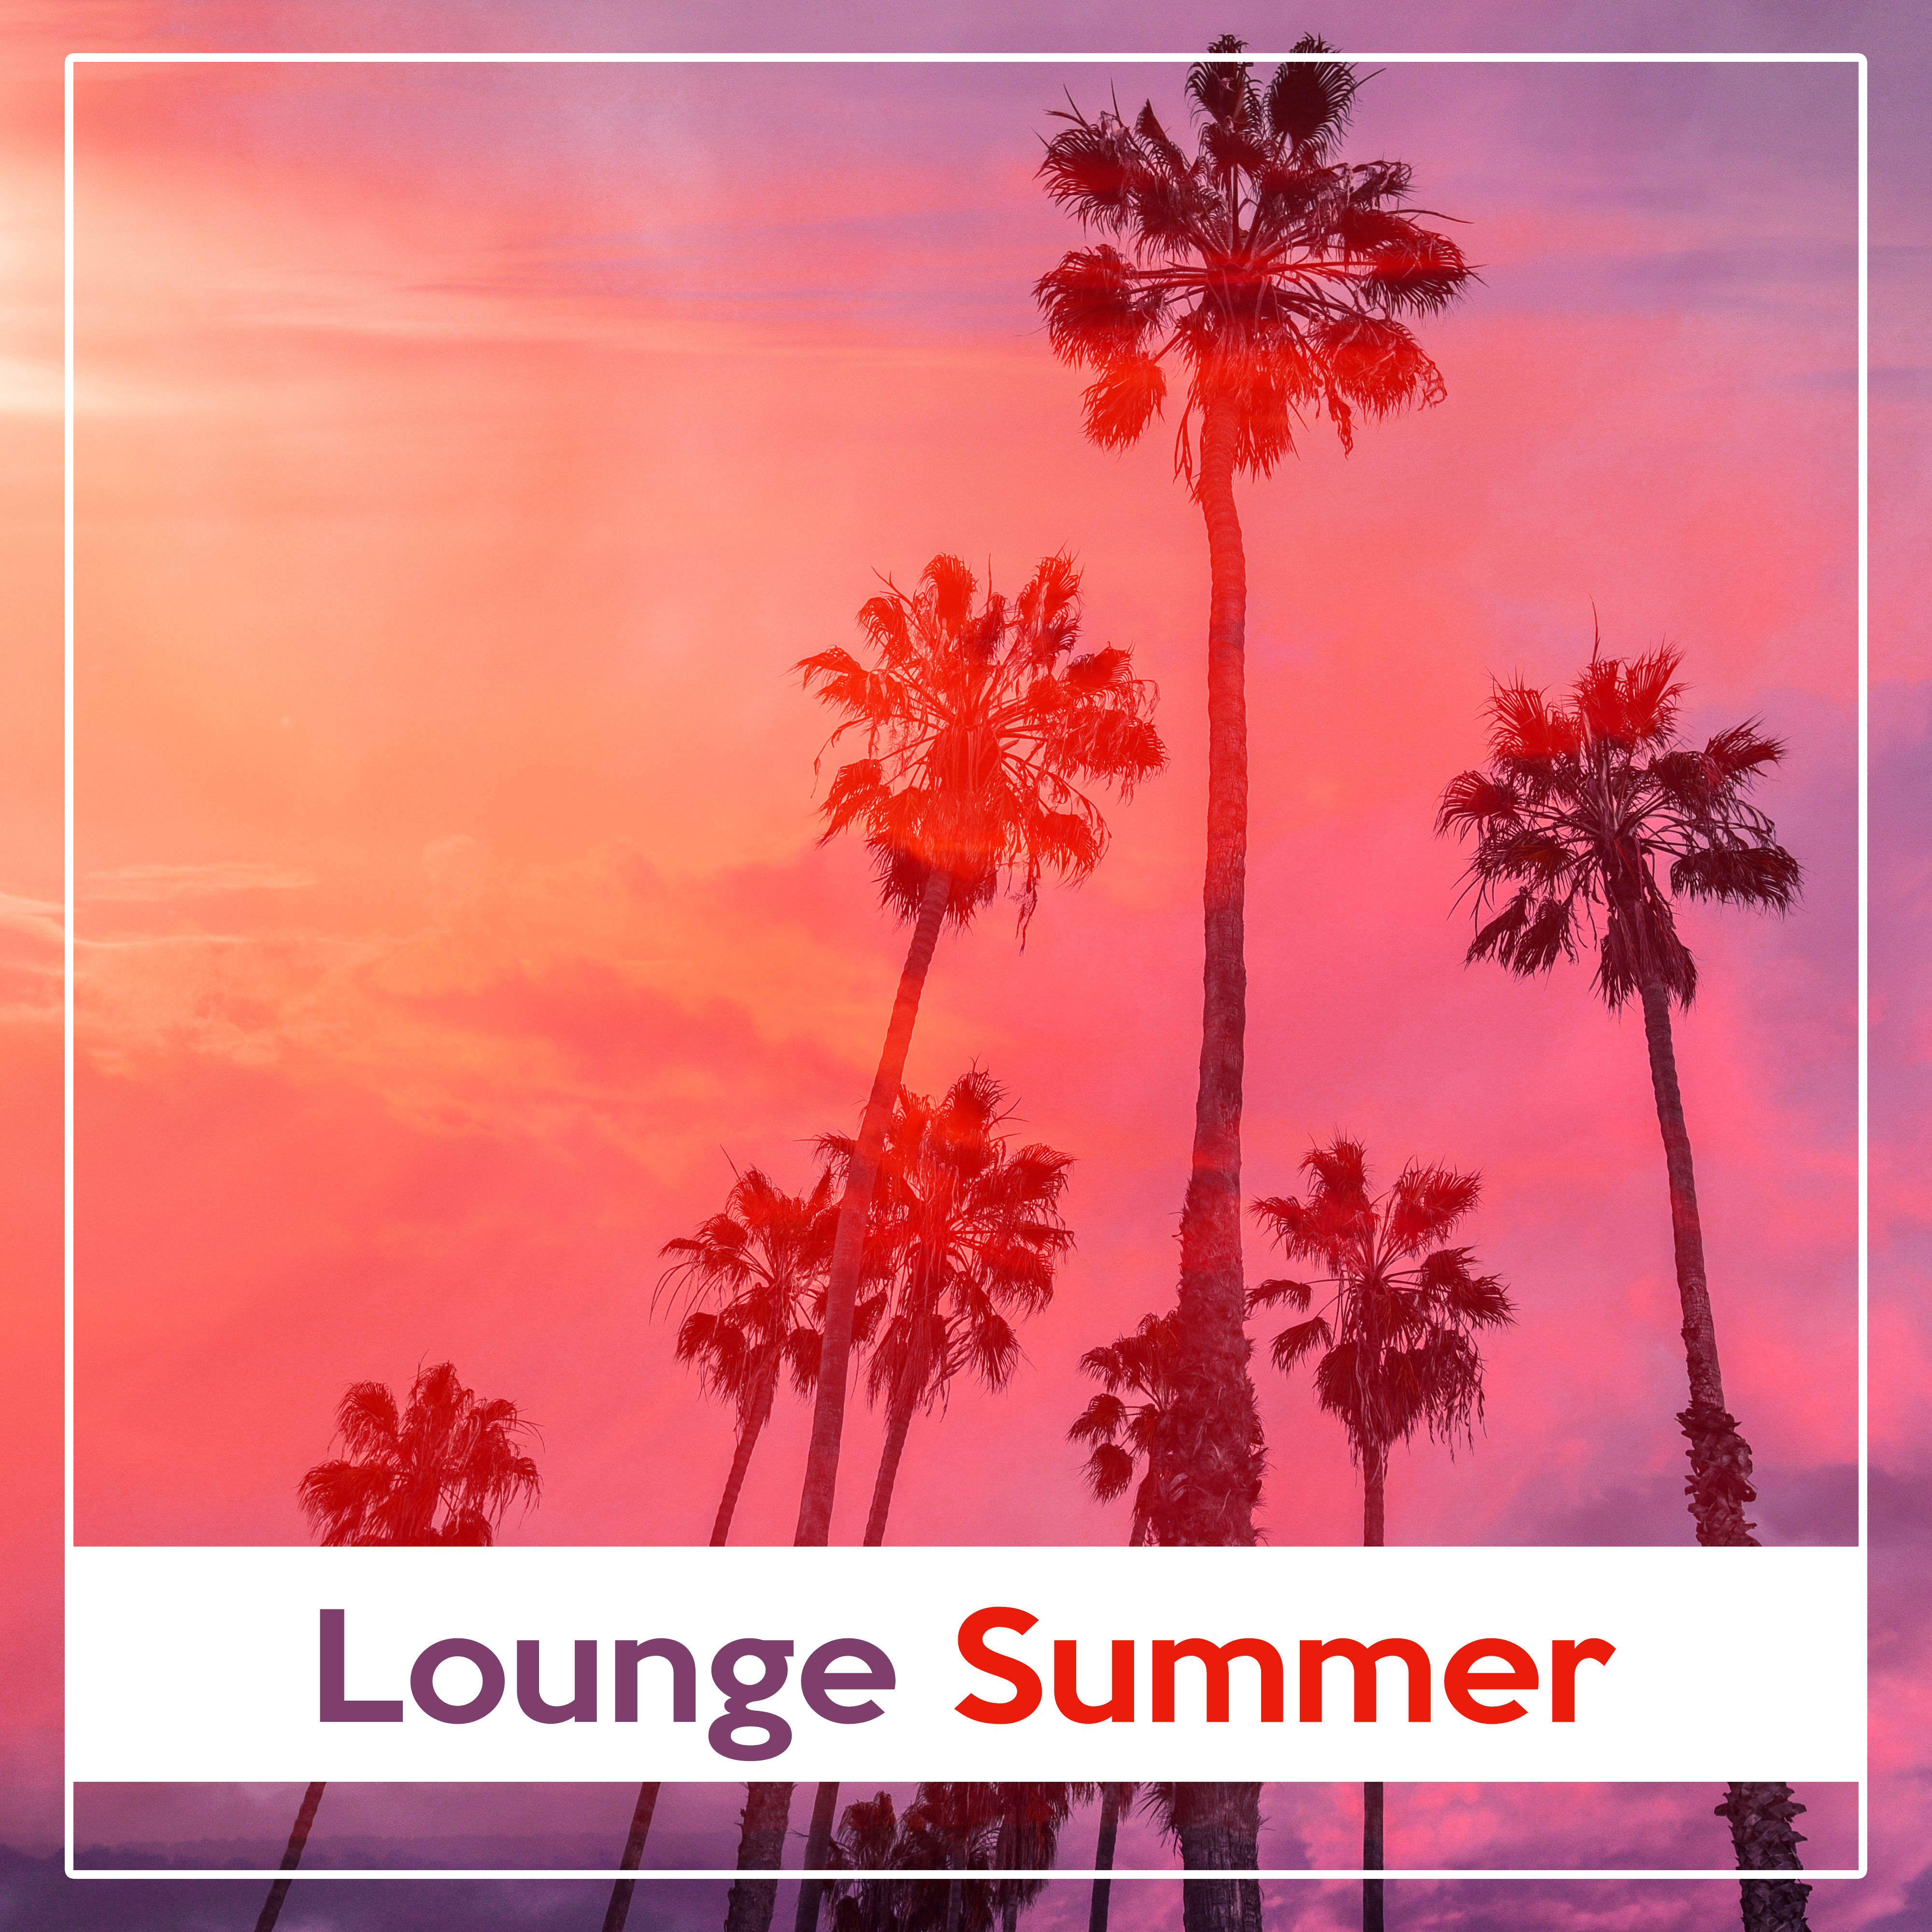 Lounge Summer – Beach Chill, Relaxing Waves, Peaceful Mind, Summertime, Relax Under Palms, Ibiza Lounge